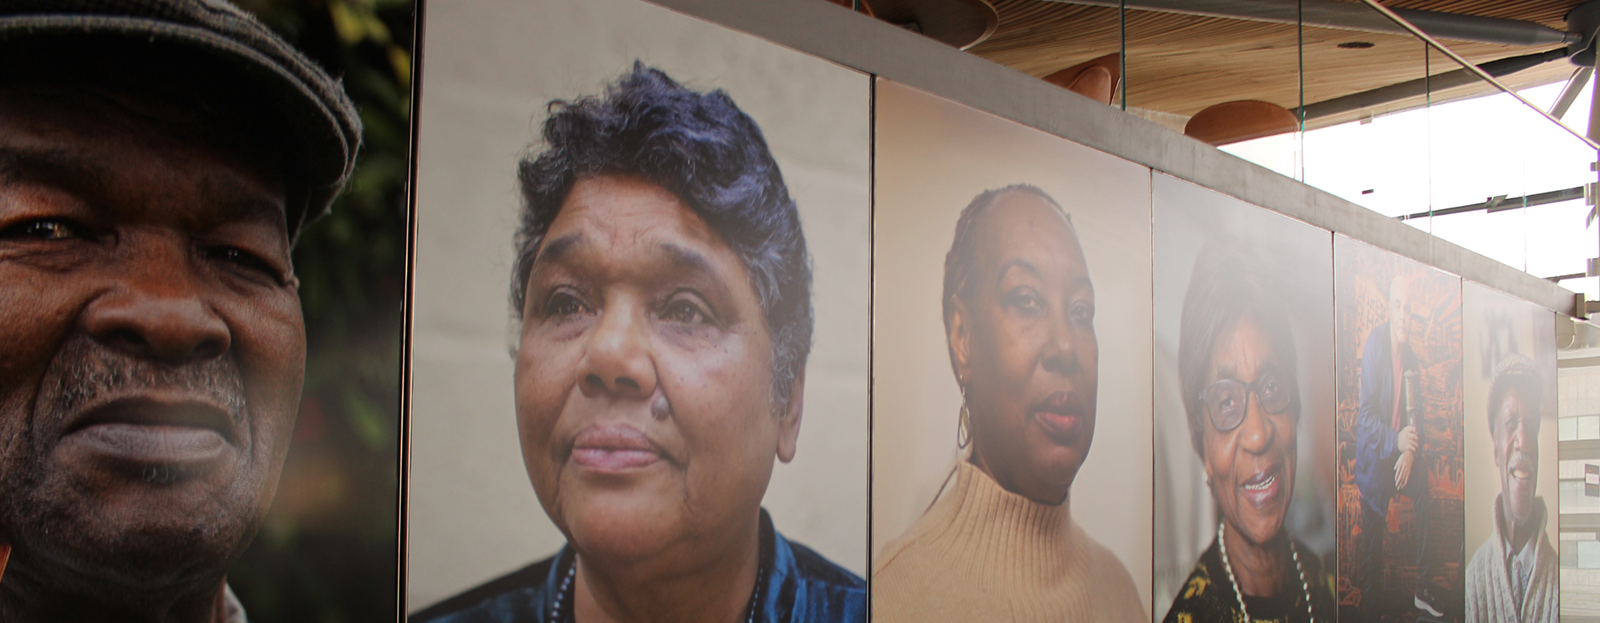 Portraits of people from the Windrush exhibition in the Senedd